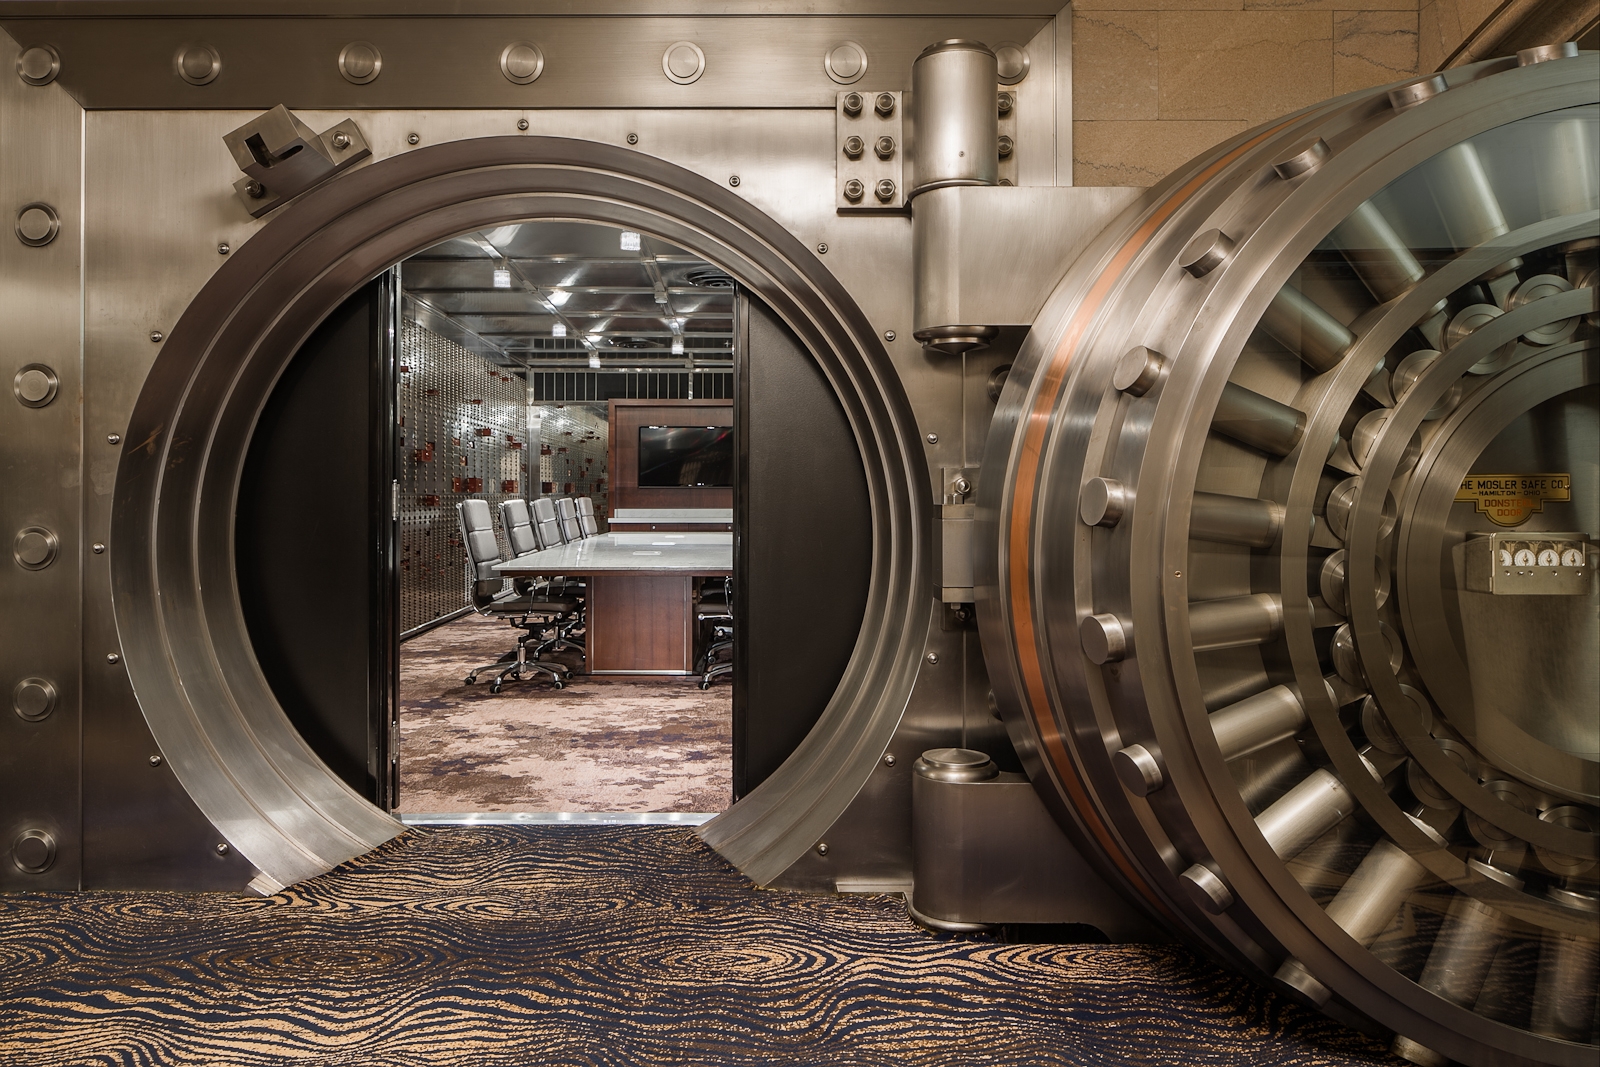 The bank vault/conference room at Courtyard by Marriott